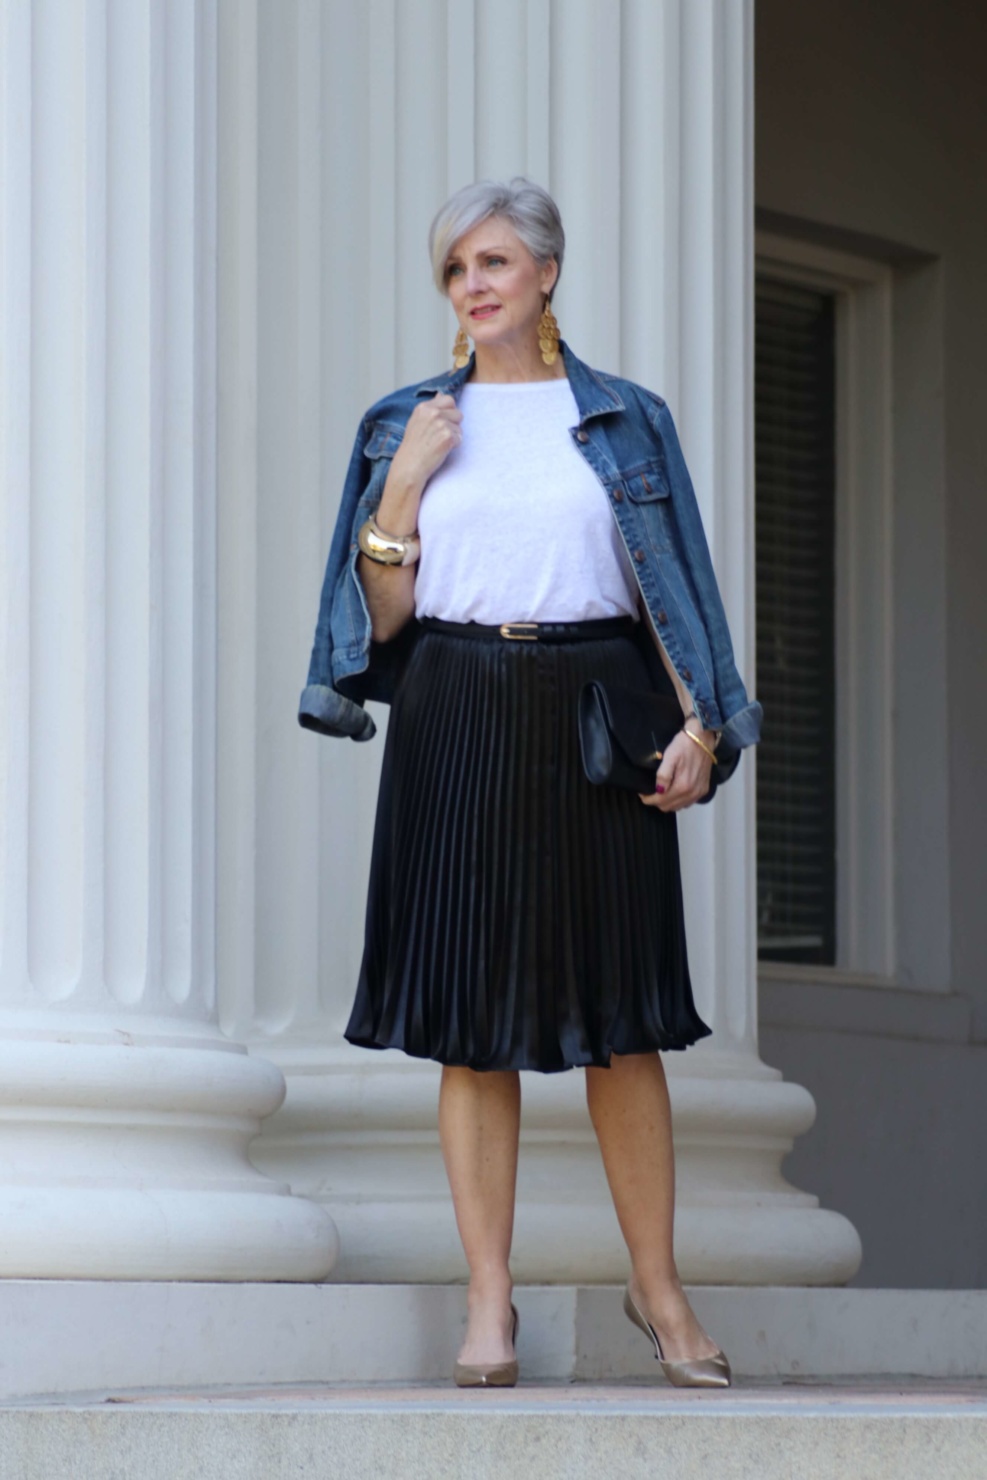 beth from Style at a Certain Age wears a black pleated skirt, white tee, denim jacket, and gold metallic pumps